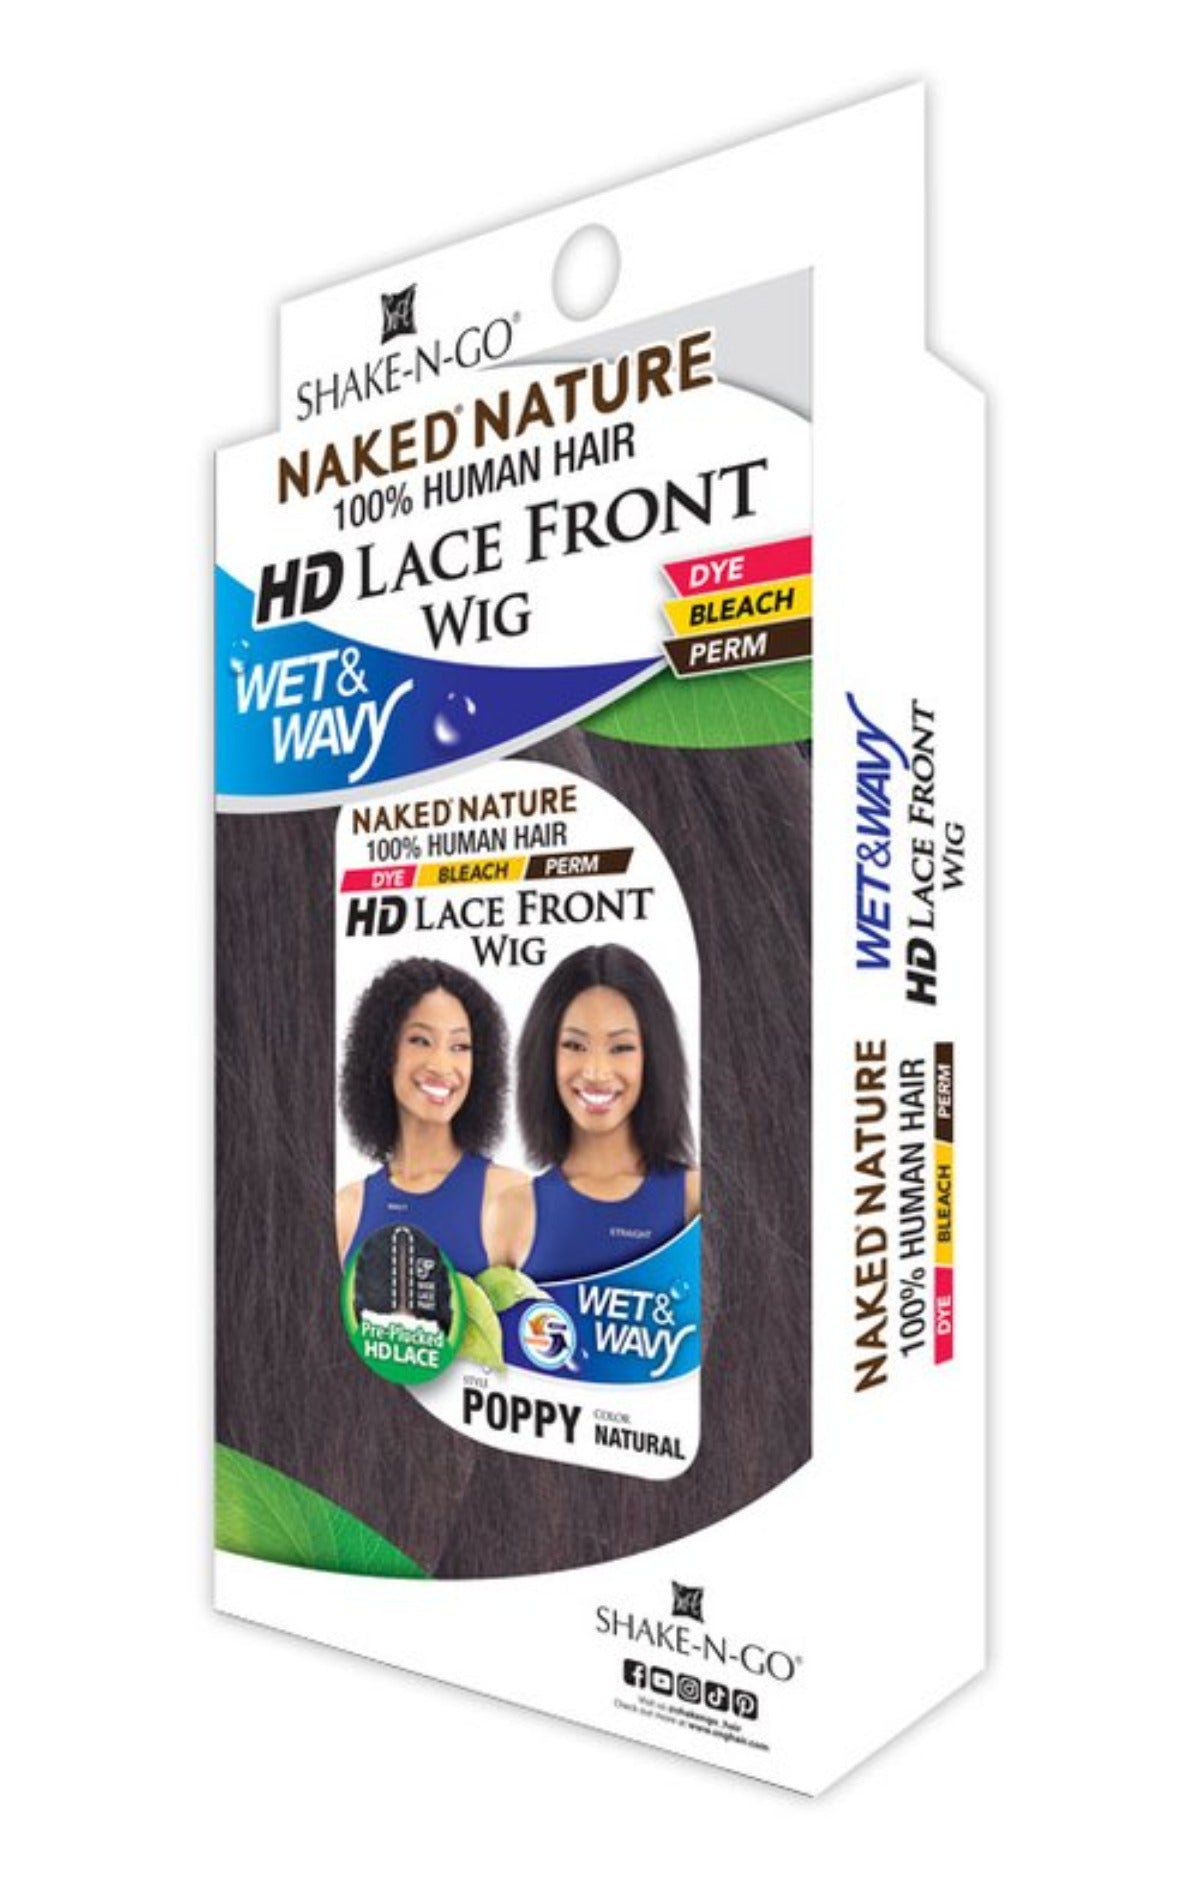 Shake N Go Naked Nature 100% Human Hair HD Lace Front Wig Wet & Wavy POPPY